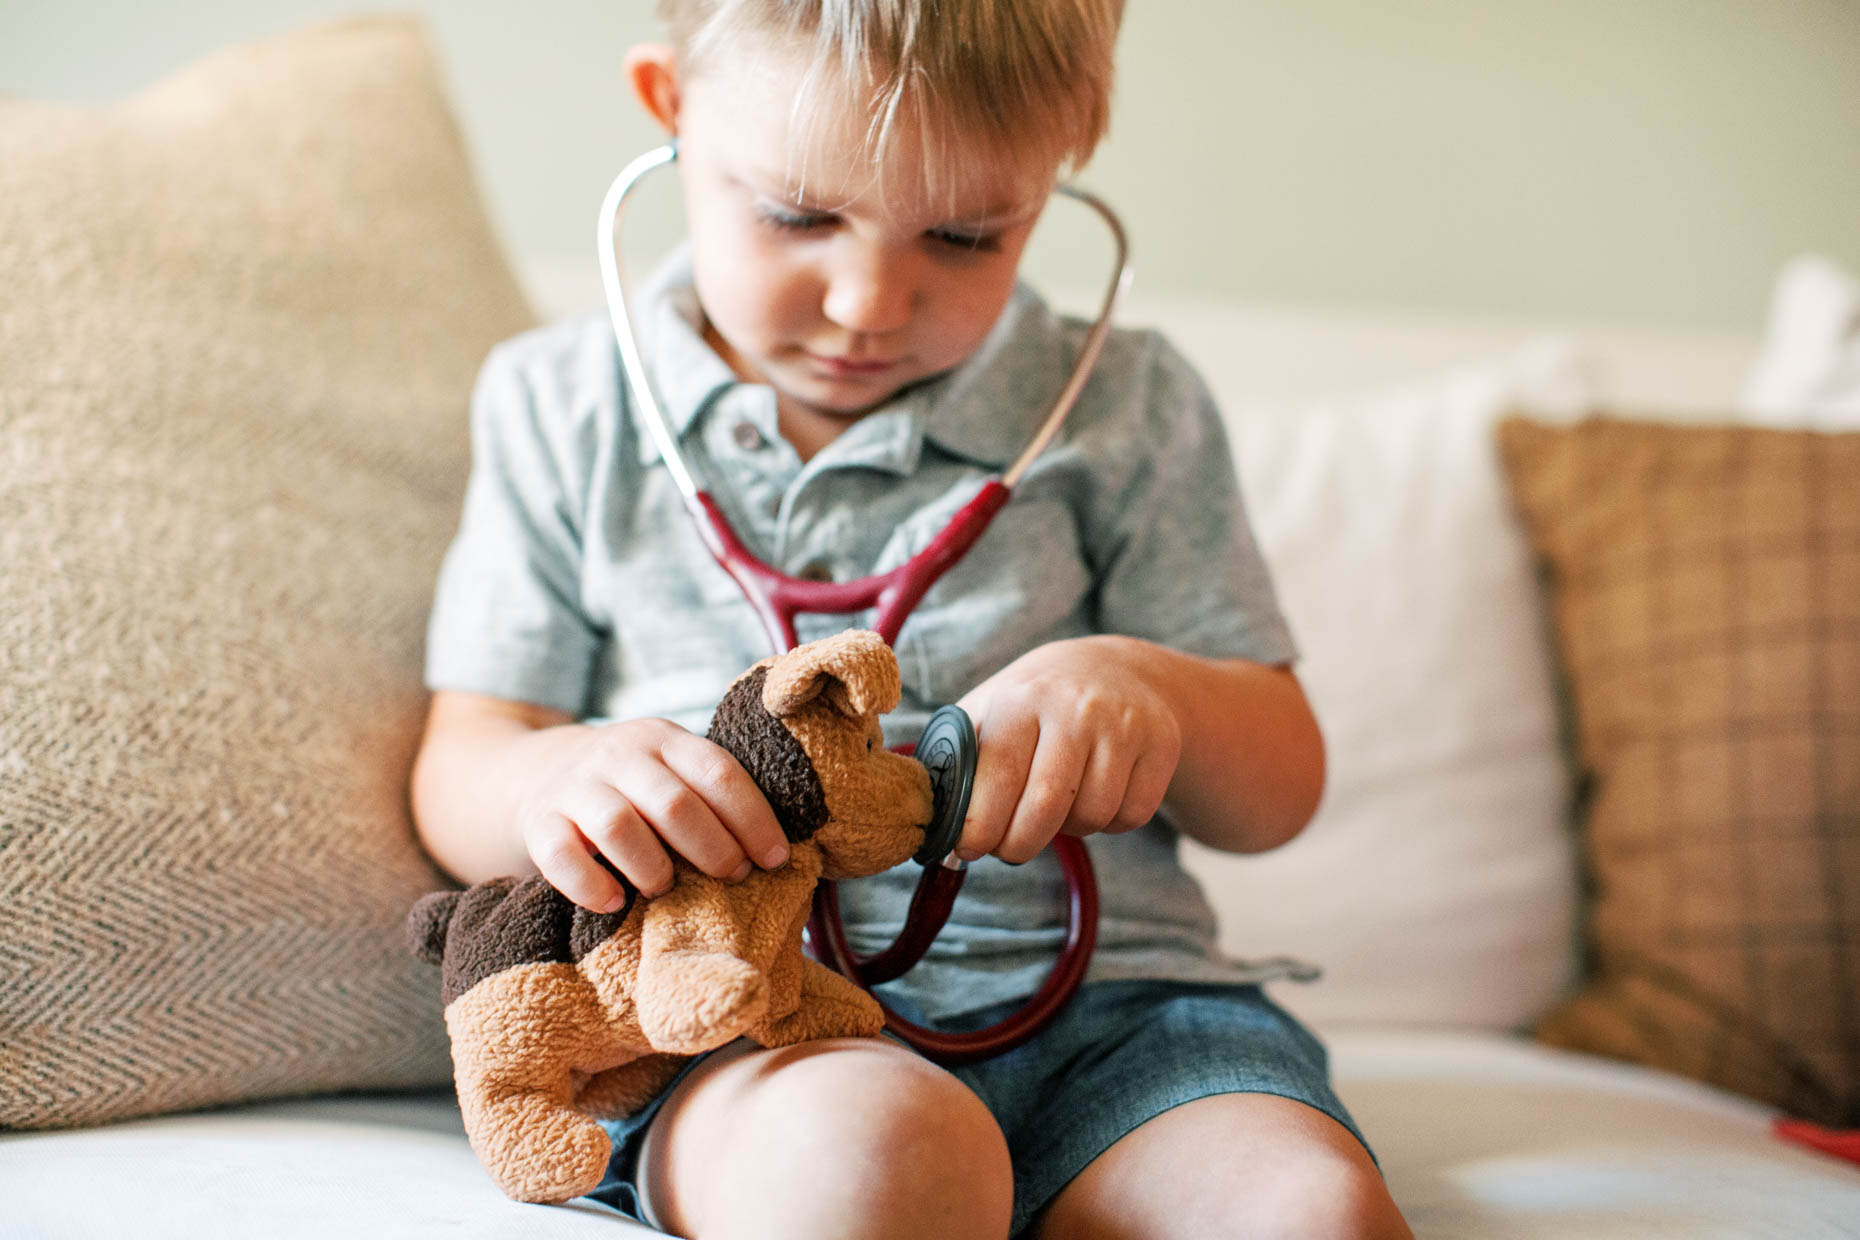 little boy holding stuffed animal for a healthcare photo shoot